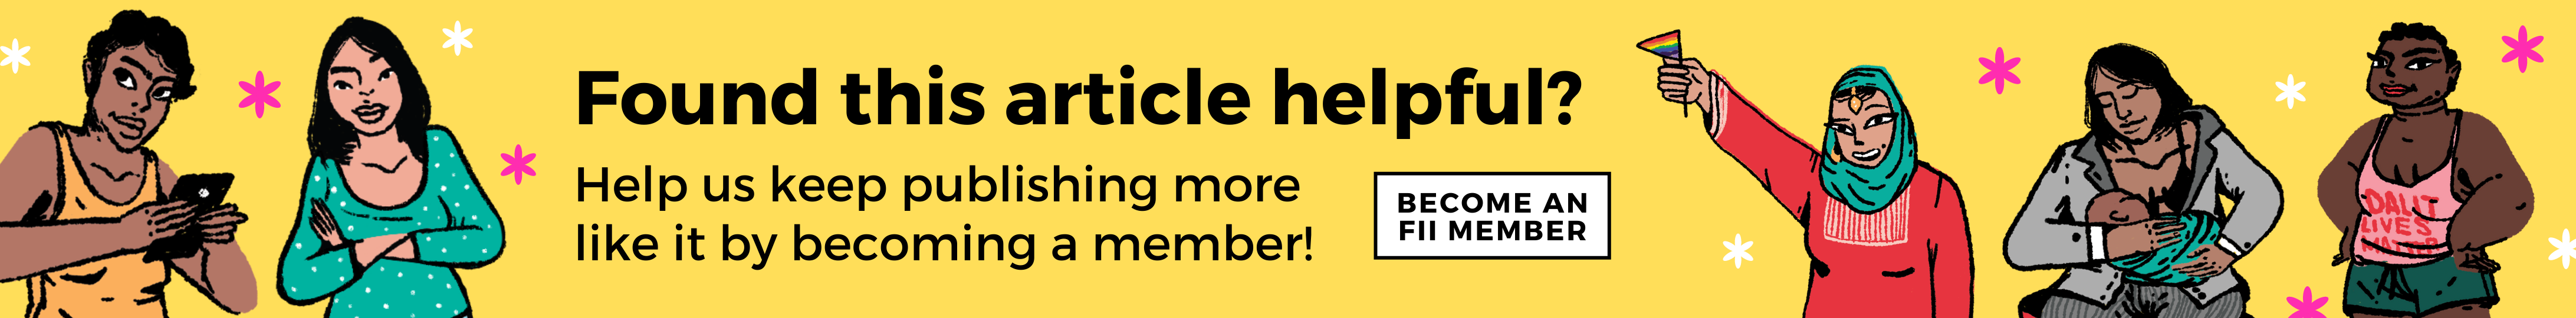 Become an FII Member